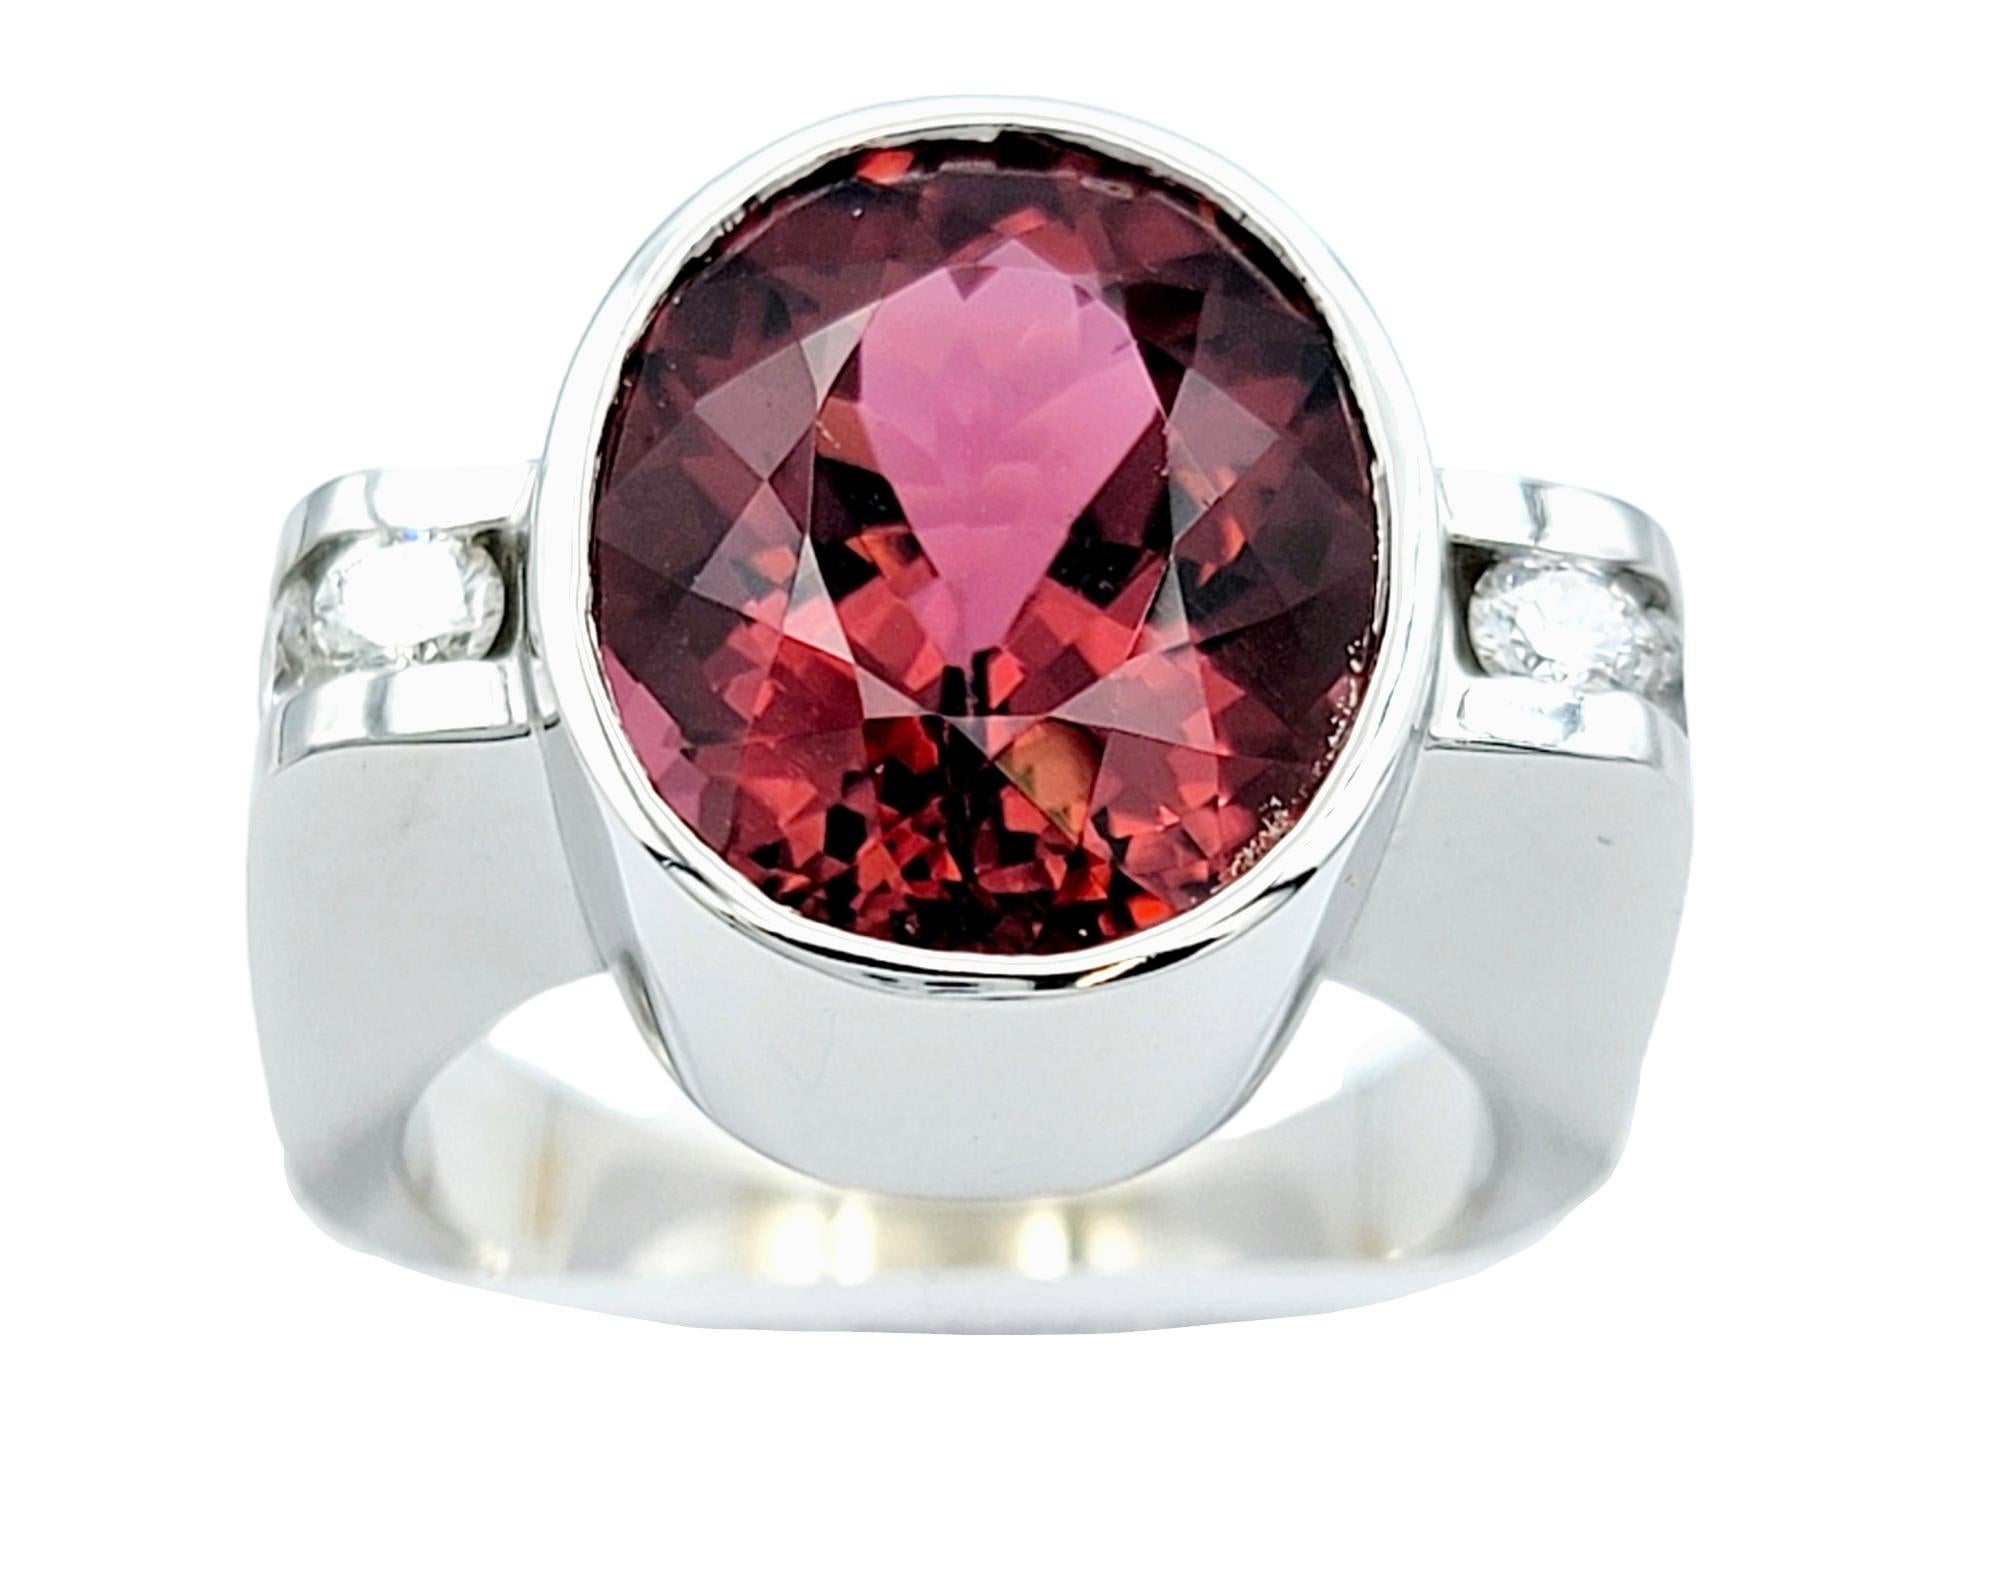 Ring size: 4.5

Elevate your fine jewelry collection with this stunning Scott Gauthier rubellite tourmaline & diamond ring. This contemporary masterpiece effortlessly blends sophistication with modern design, making it a true showstopper.

At the